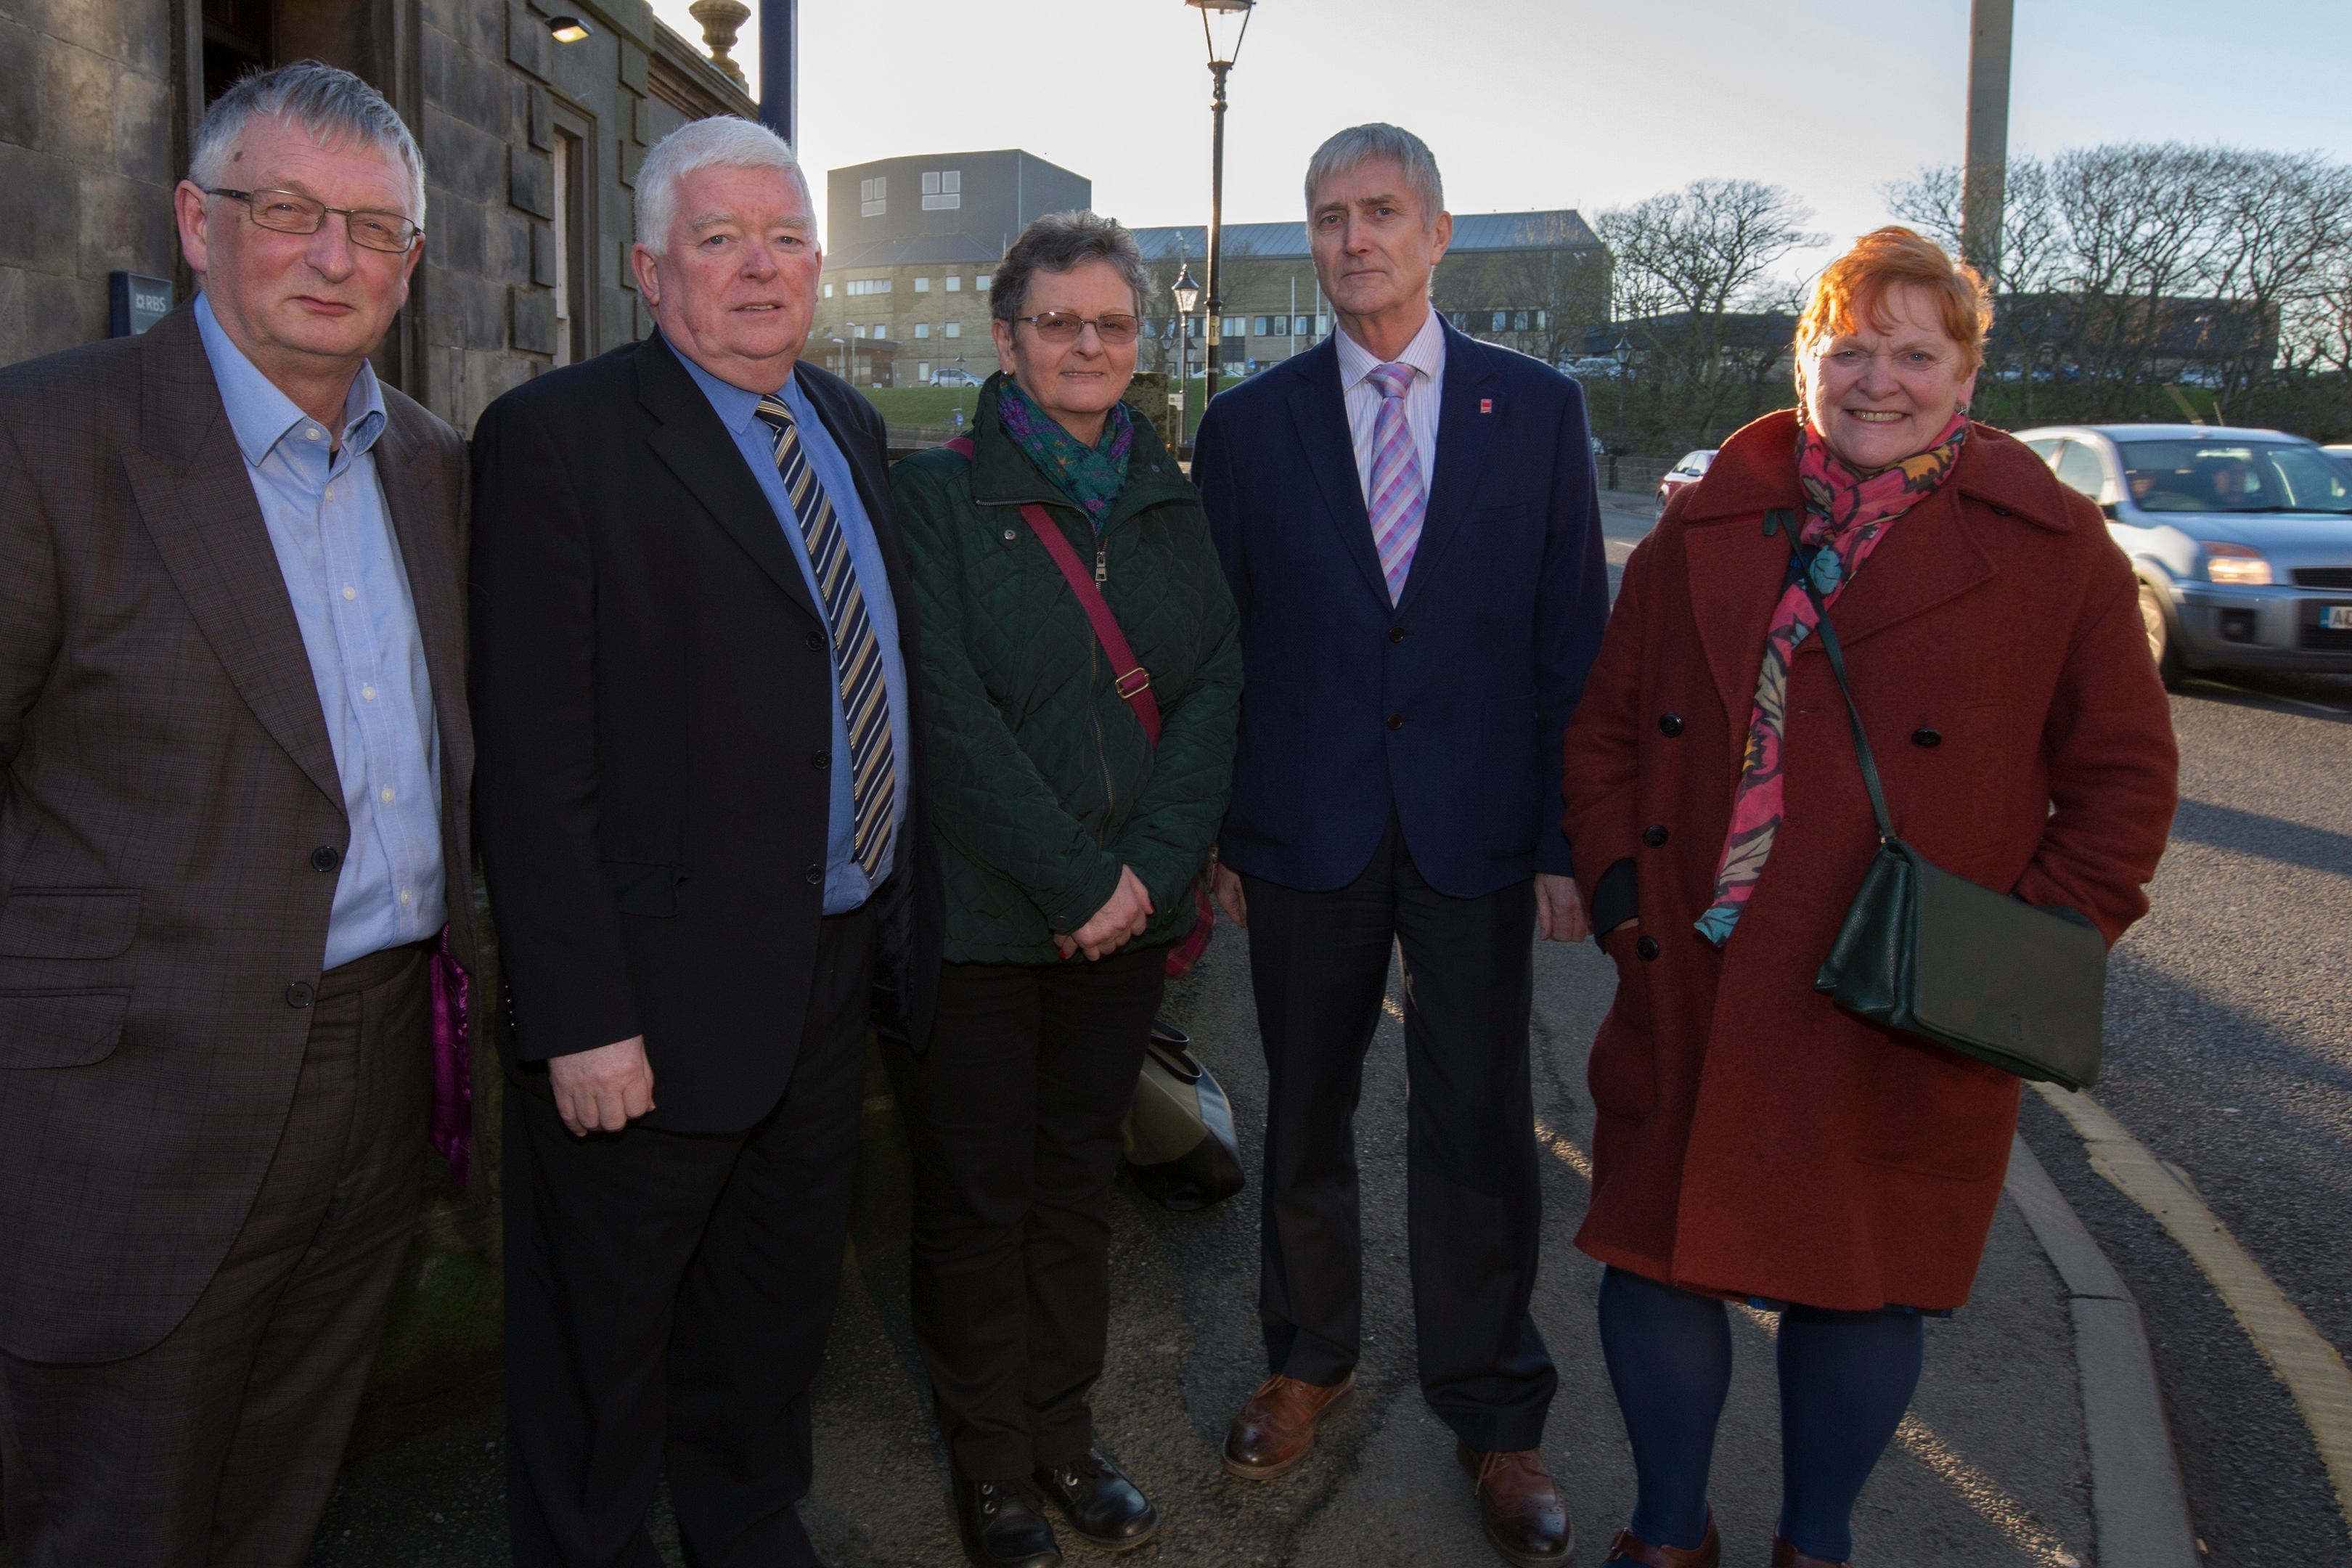 Following their private meeting in Wick are, from left, David Alston, chairman NHS Highland, Councillor Bill Fernie, chairman of CHAT Liz More, CHAT member, Councilor Roger Saxon, chairman Highland Council's Caithness area committee and Councillor Margaret Davidson, convenor of Highland Council, with Caithness General Hospital in the background.